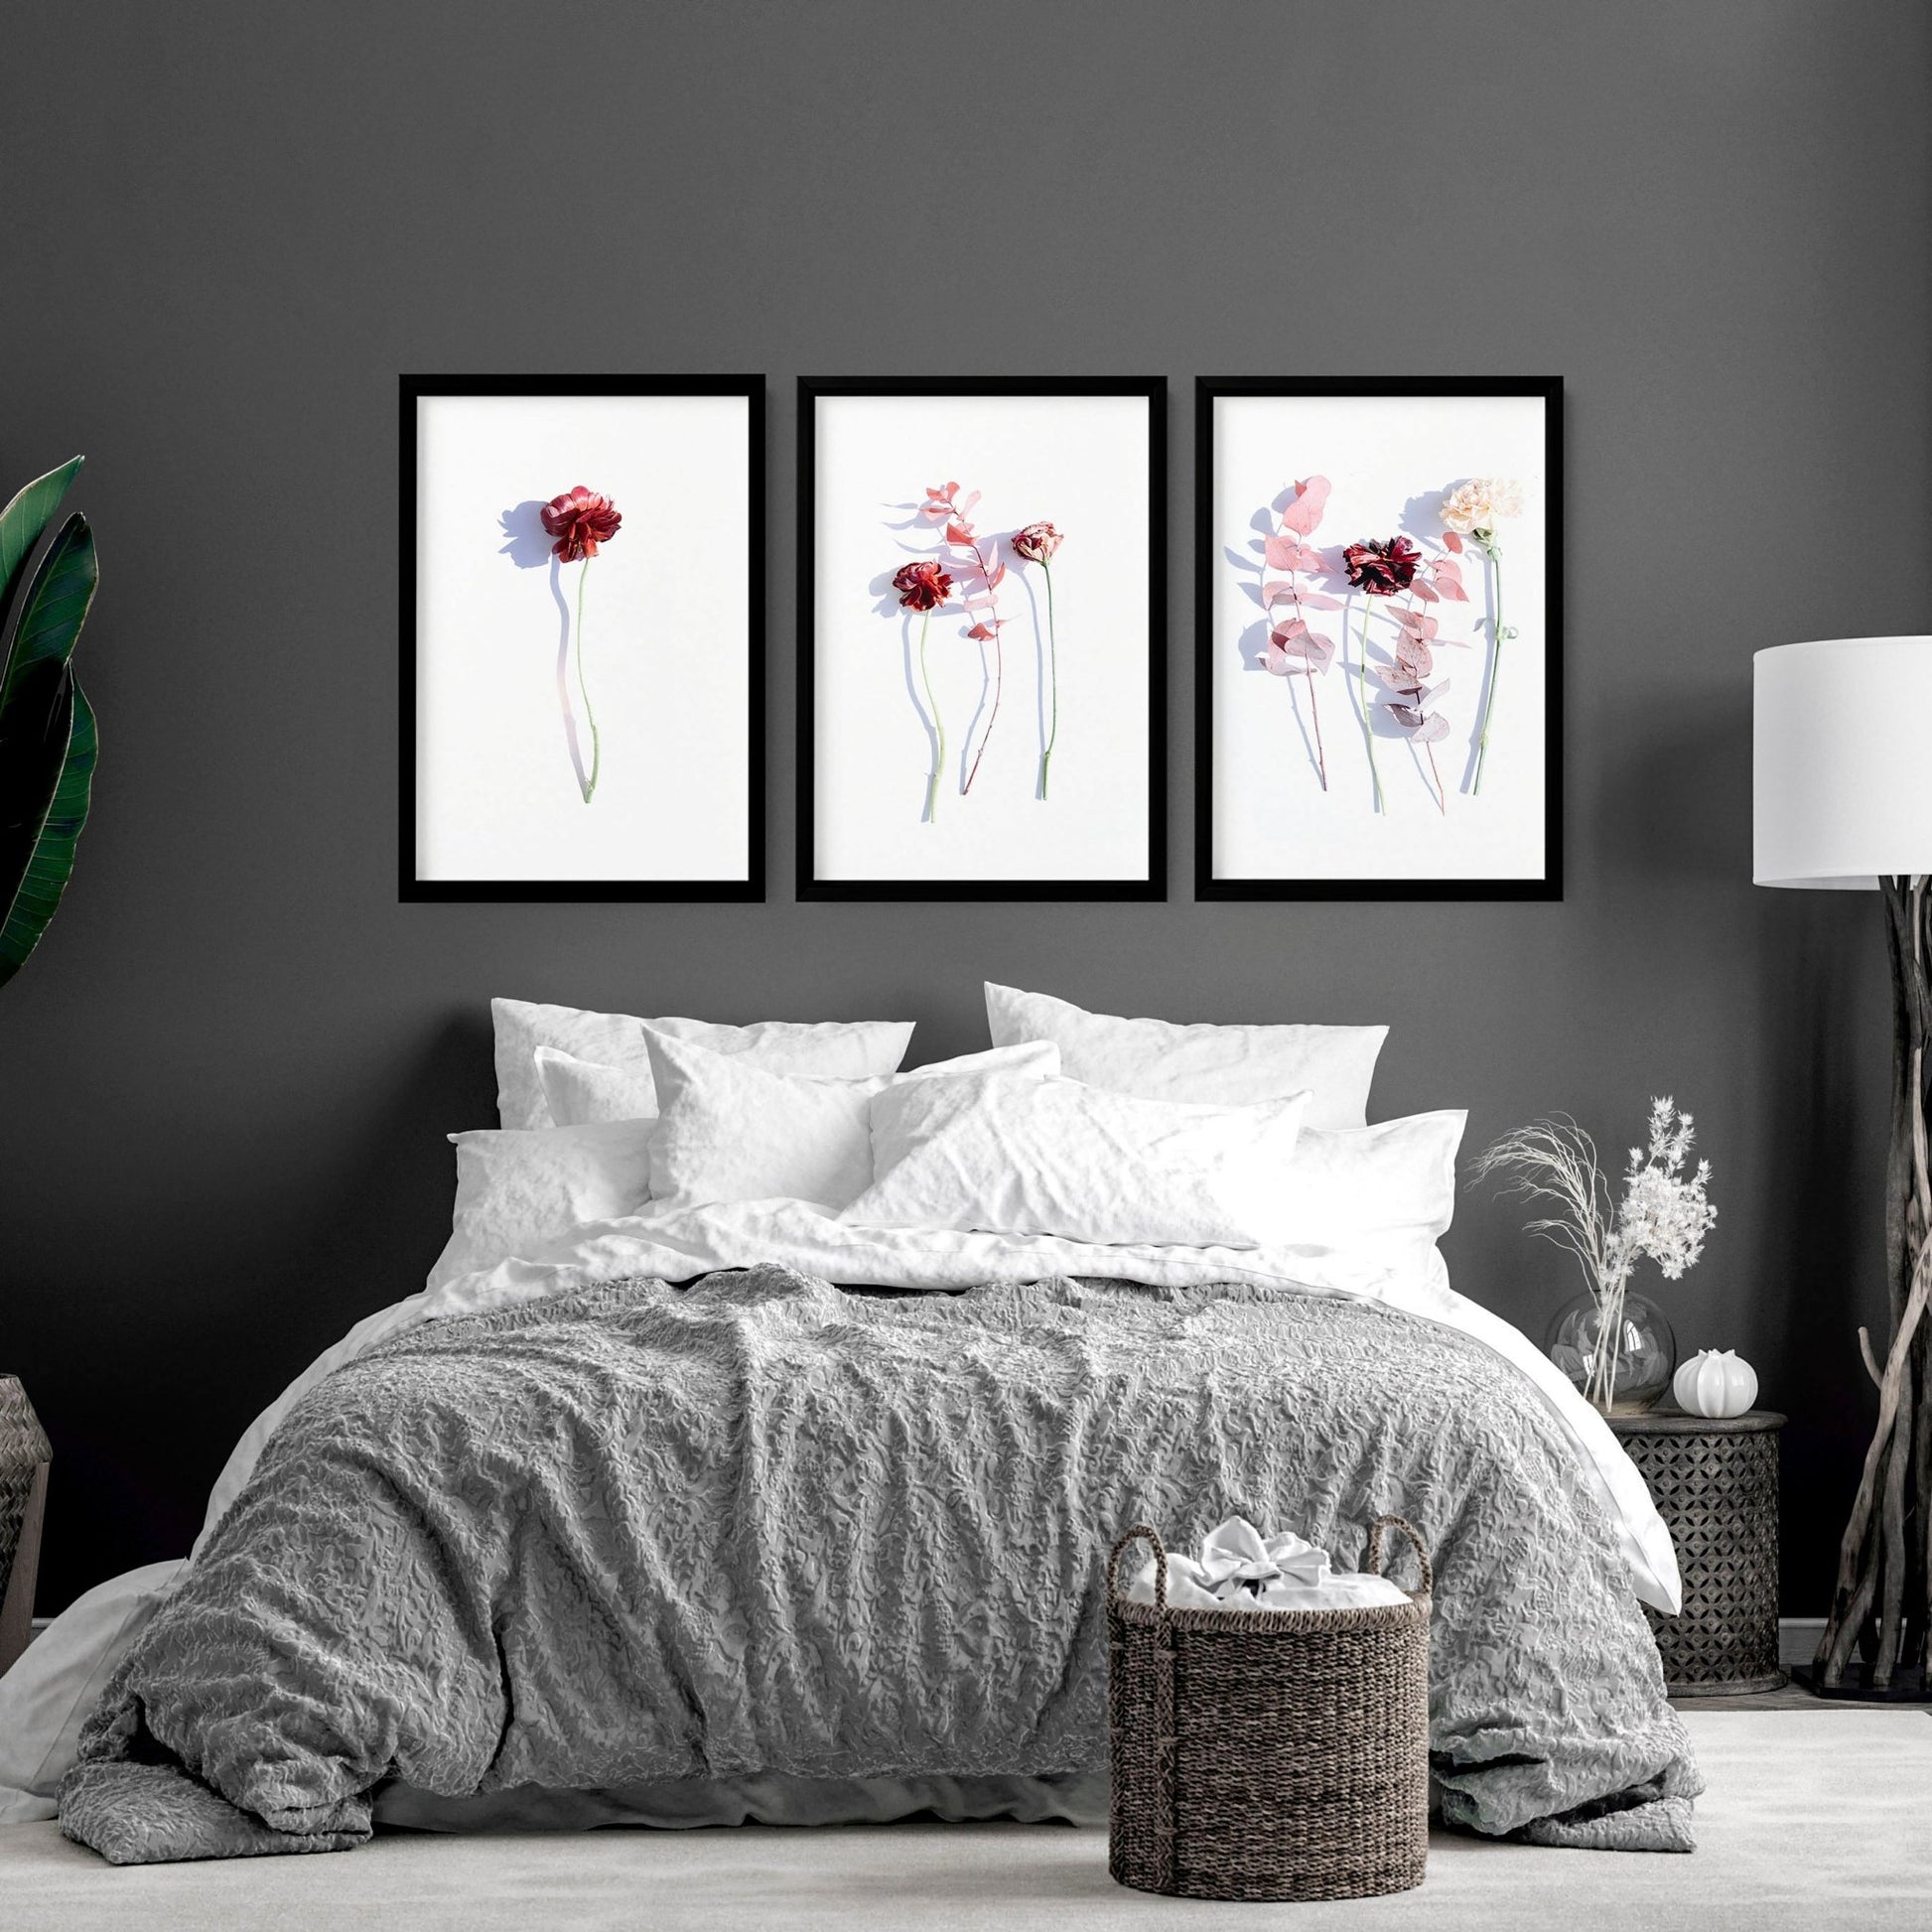 Wall art bedroom | set of 3 prints - About Wall Art